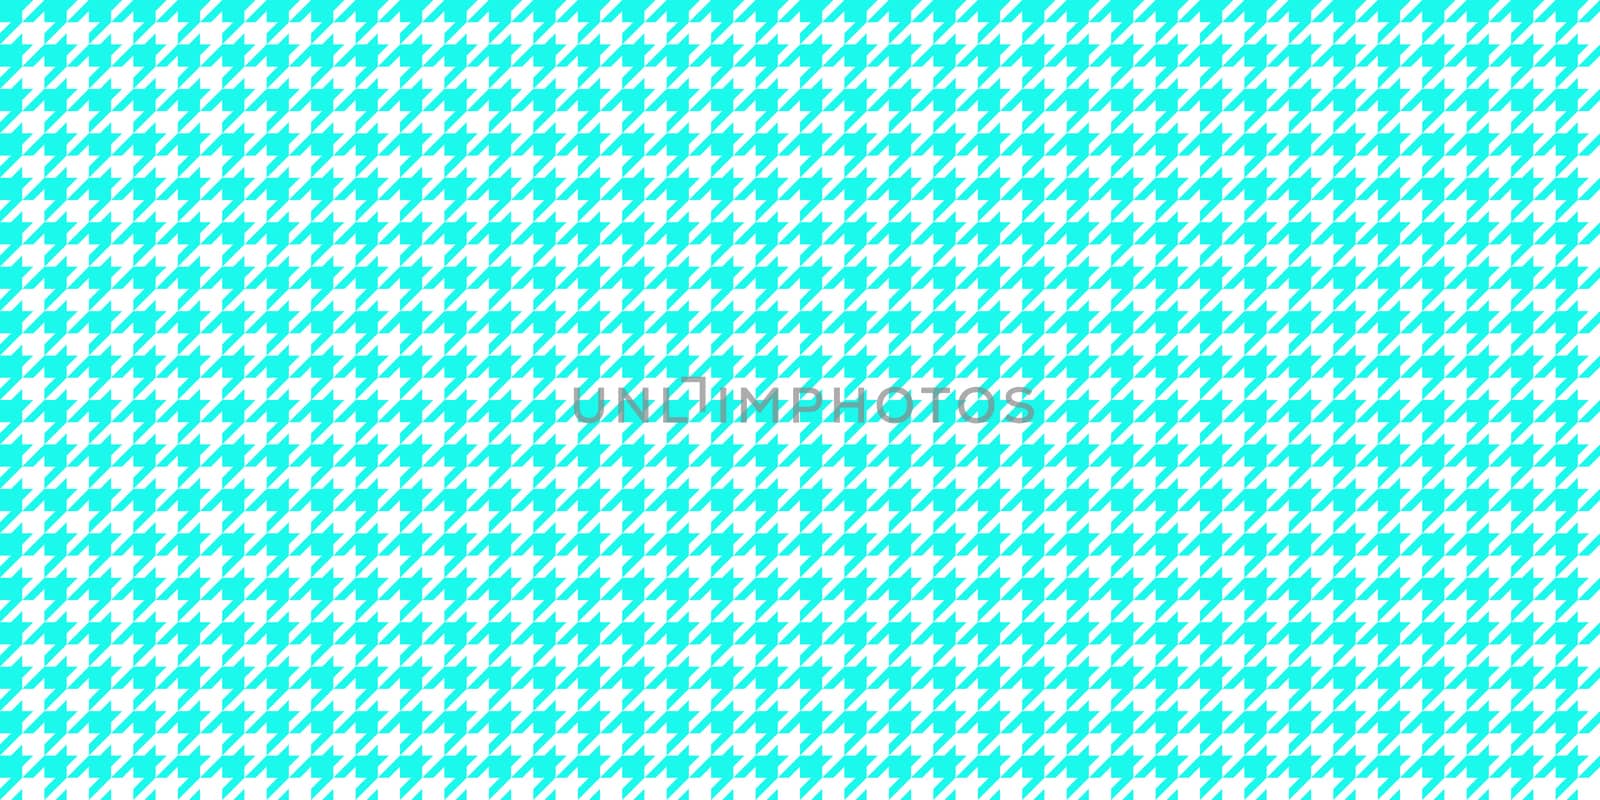 Sky Blue Seamless Houndstooth Pattern Background. Traditional Arab Texture. Fabric Textile Material.